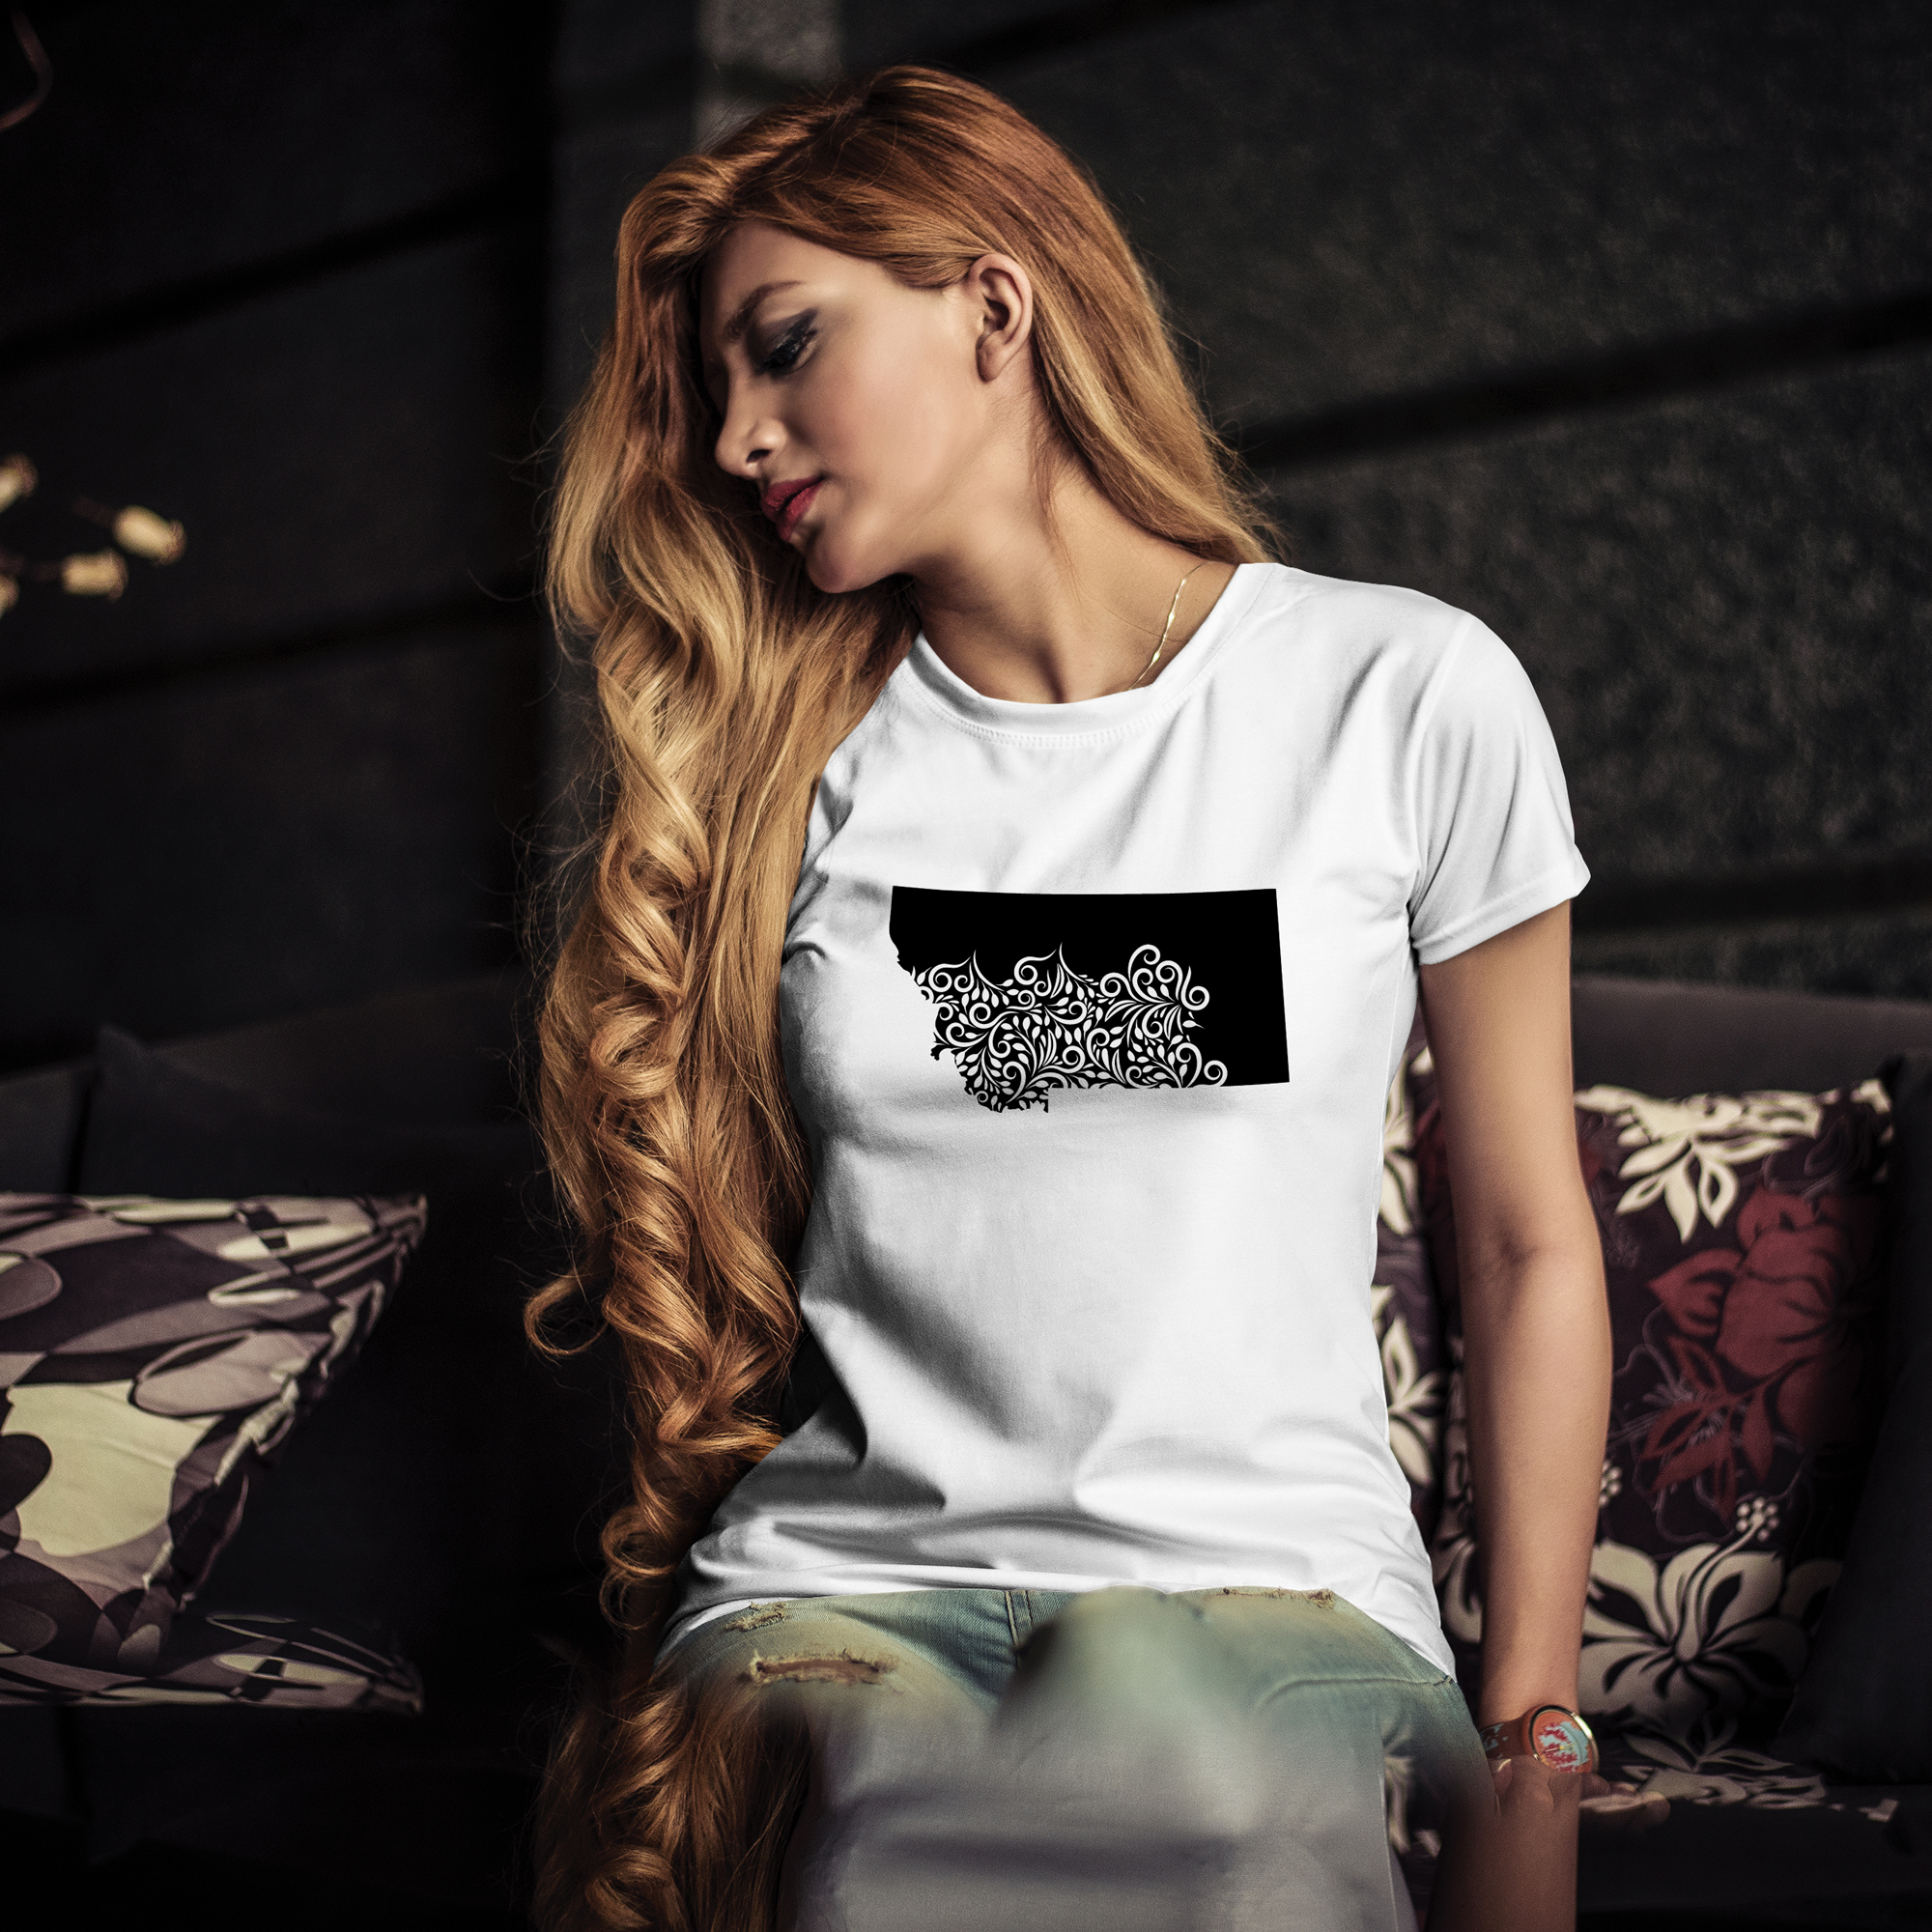 White t-shirt with black illustration of Montana state.